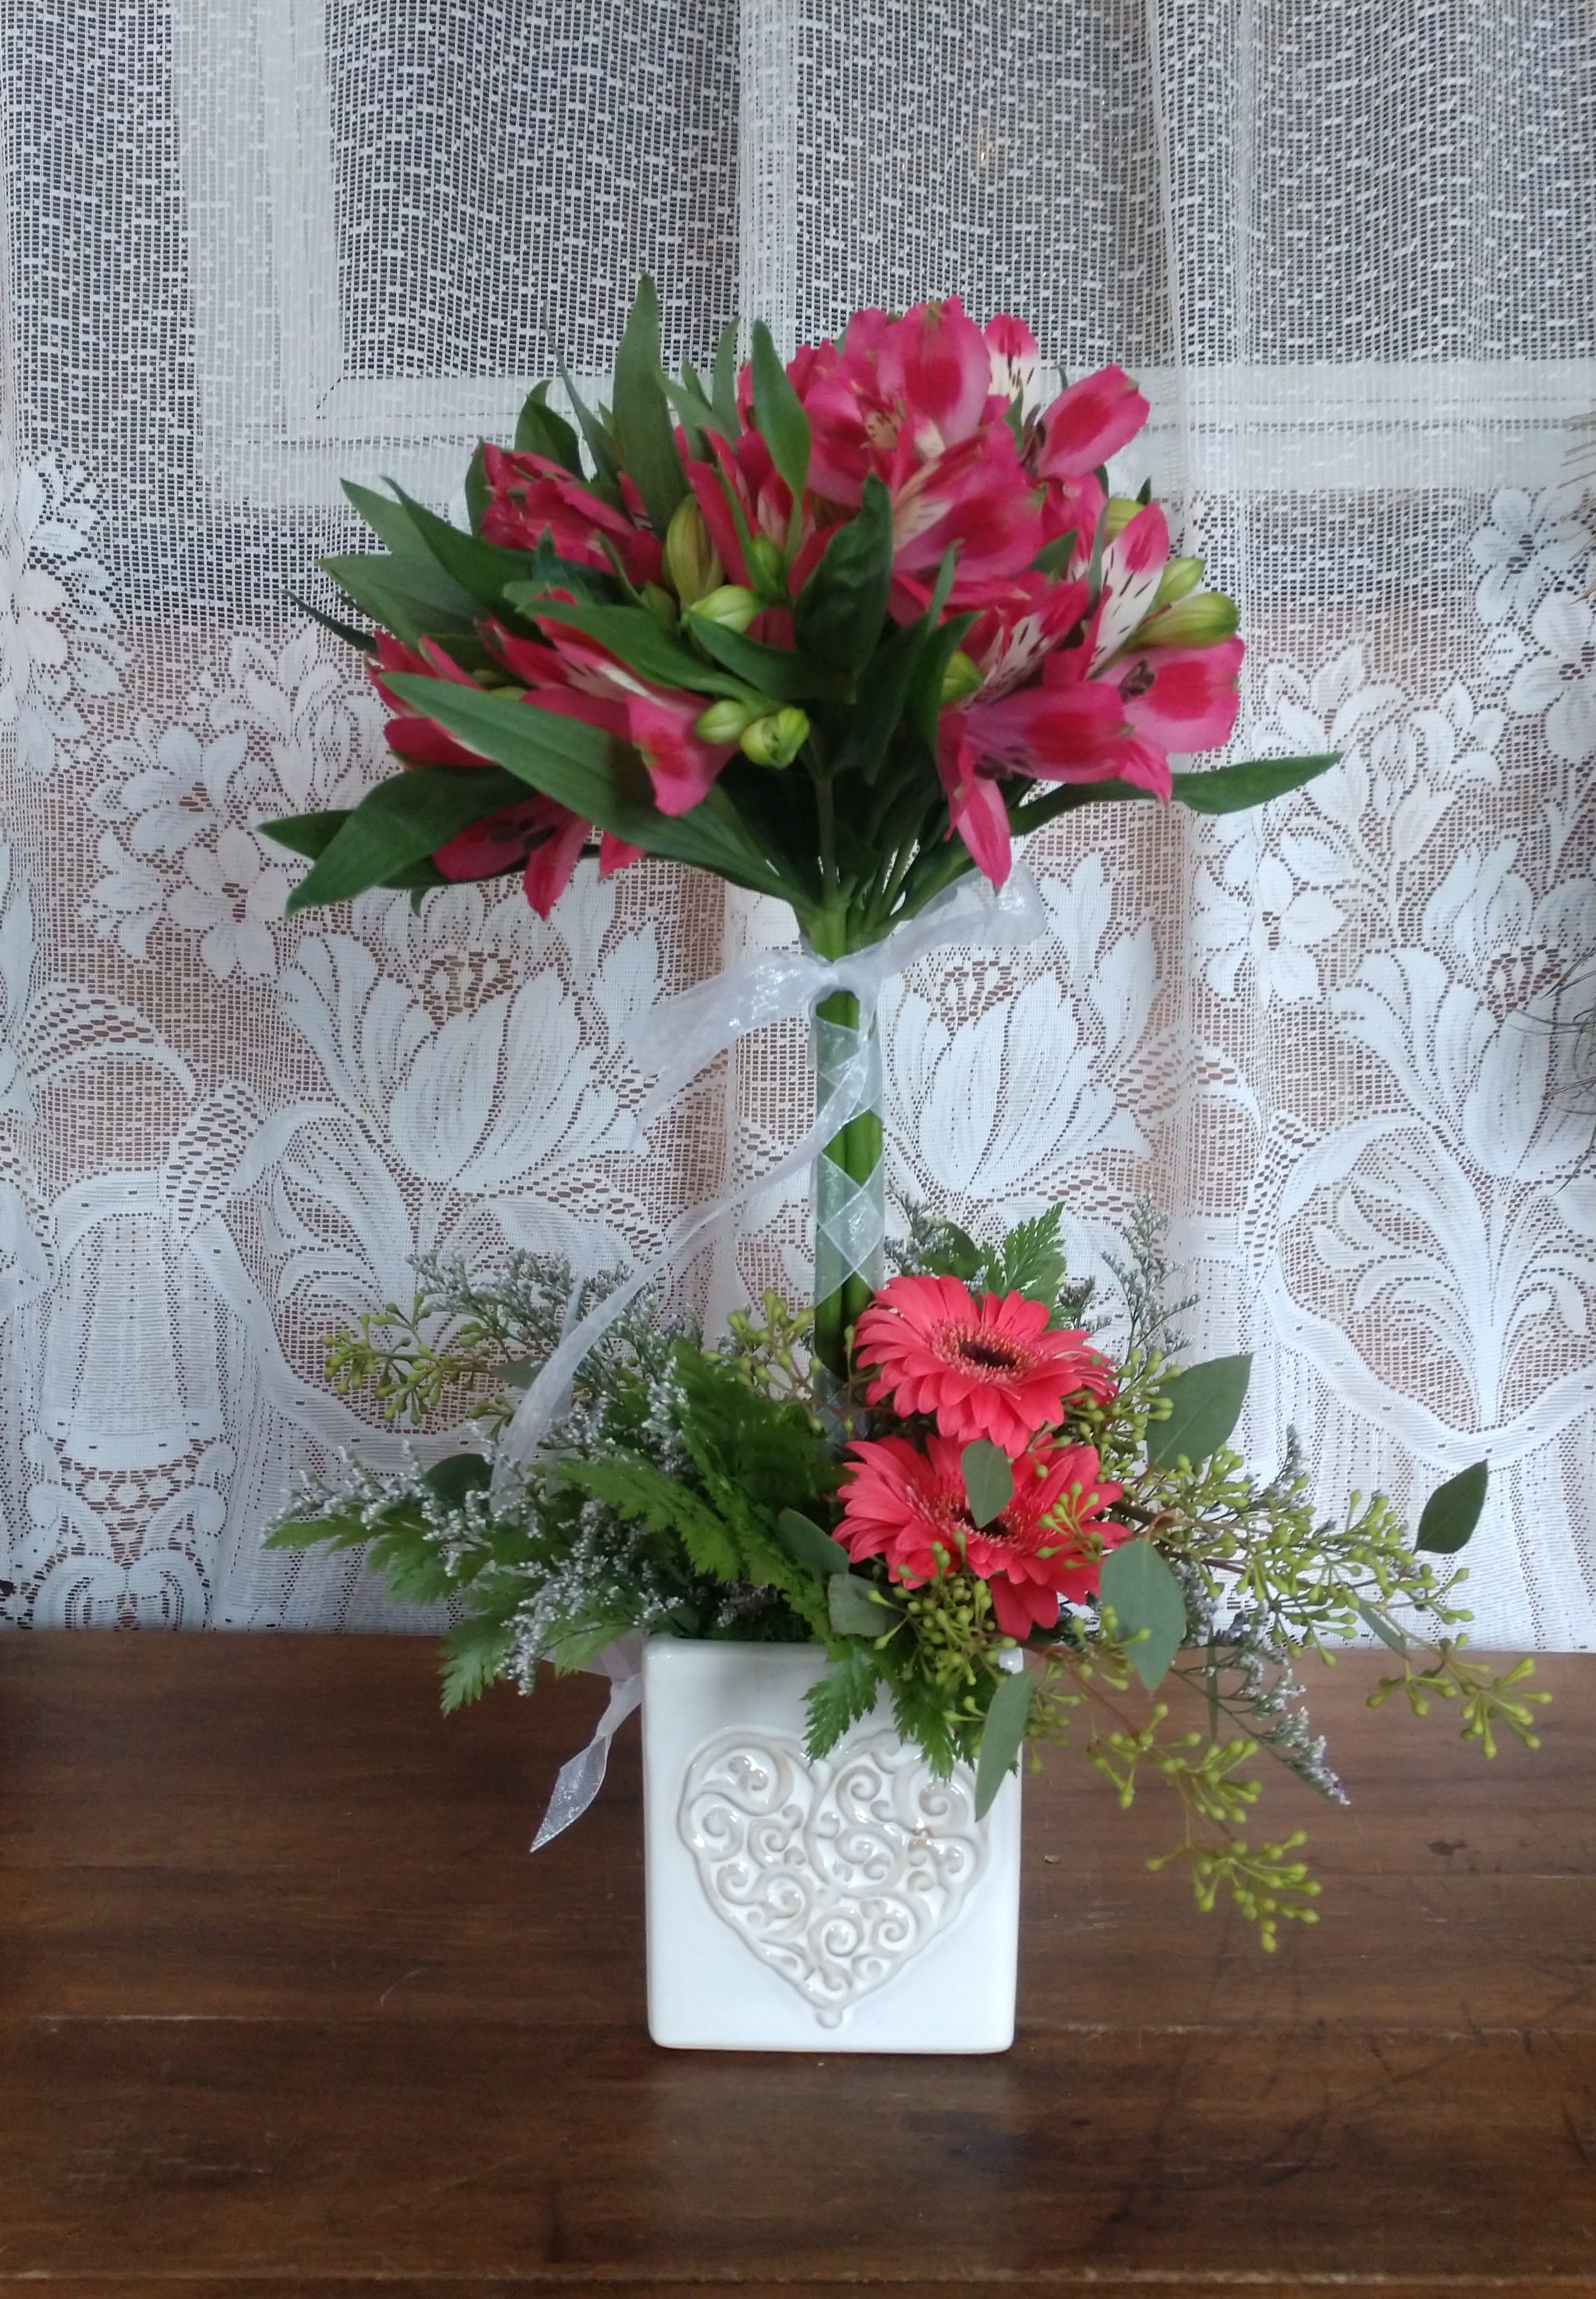 Blooming Topiary - A garden design of locally grown alstroemeria to resemble a growing topiary.